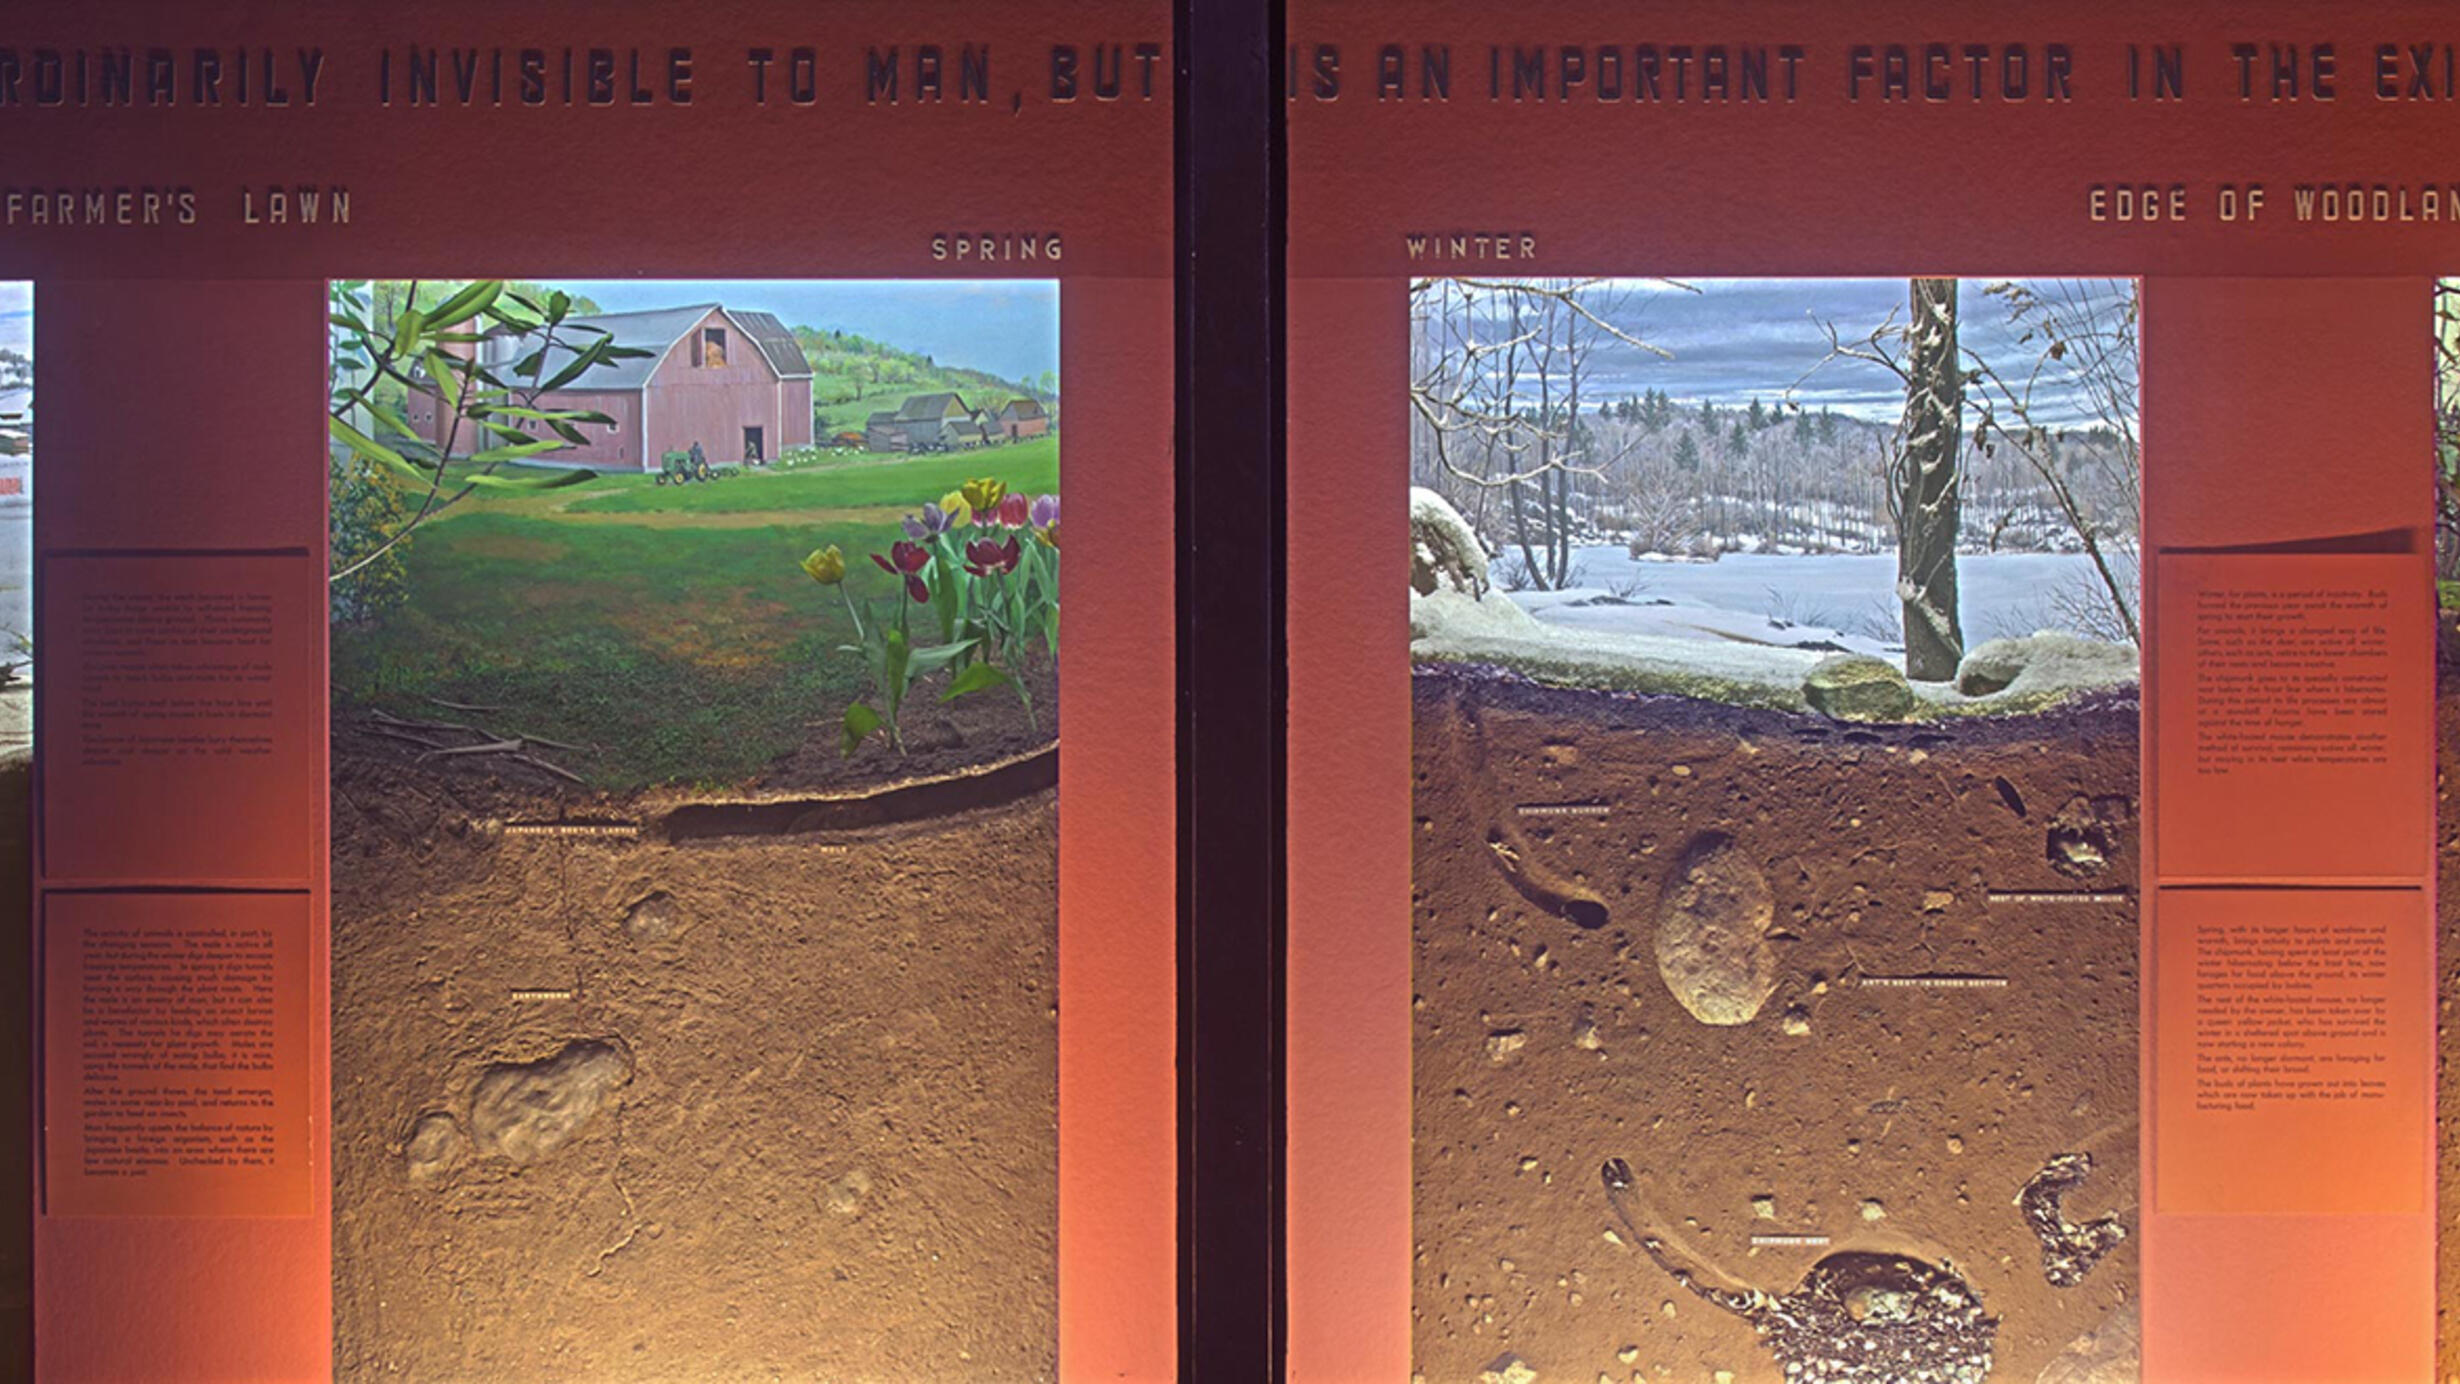 Museum installation showing four dioramas that include a cross section of the soil of the Farmer's lawn and the woodland in different seasons.